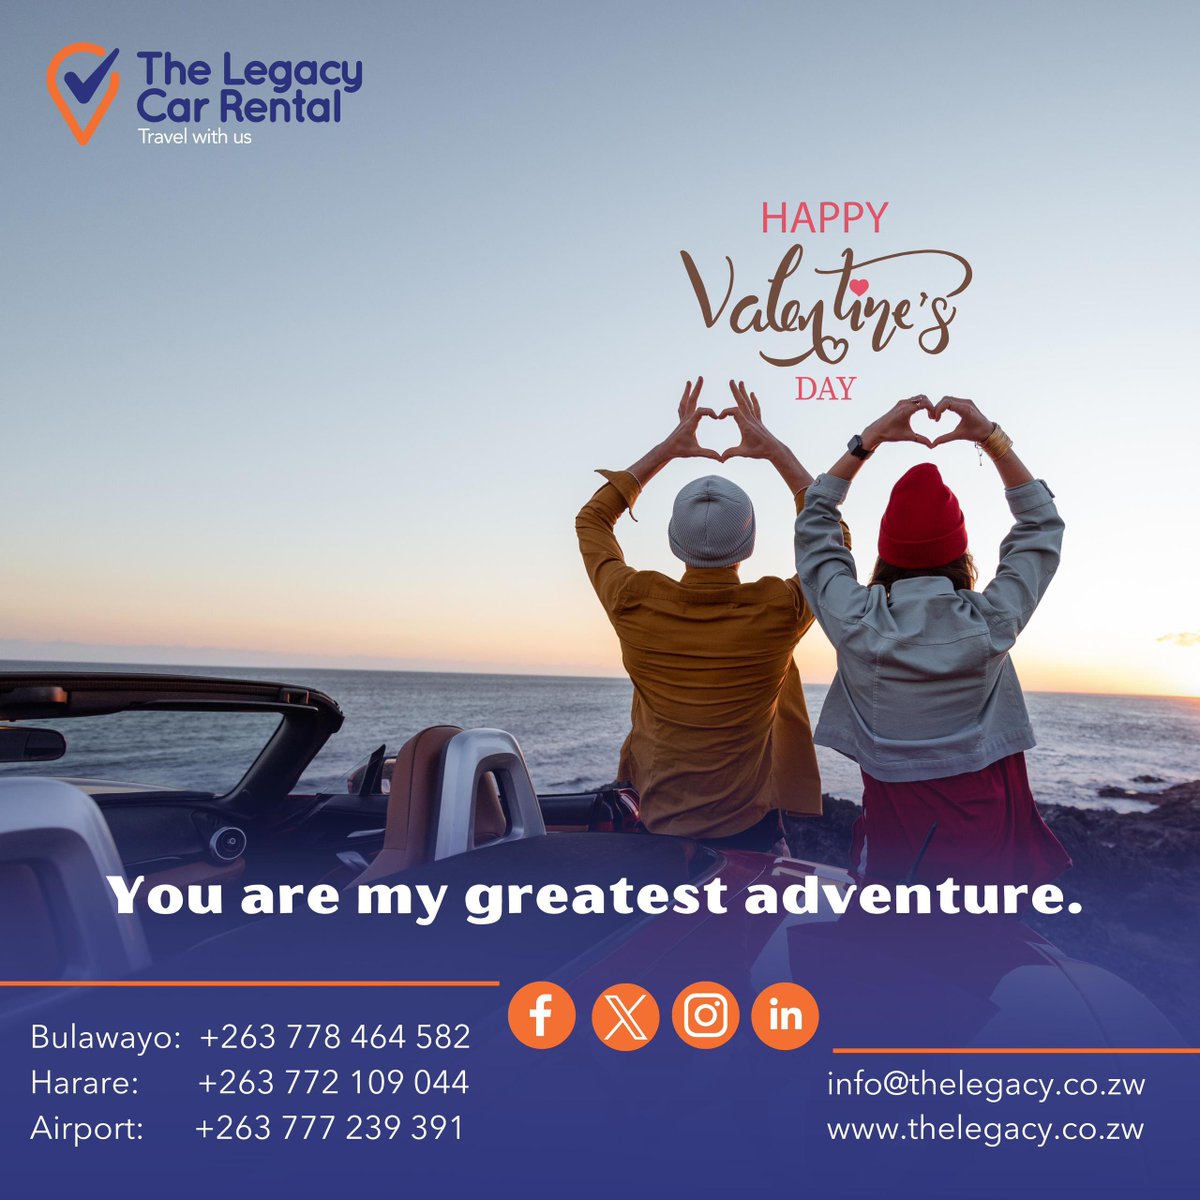 Actually, the best gift you could have given her was an adventure of a lifetime. Don't fret, you still have a chance to make it happen. Book now and create unforgettable memories!
#valentinesgift #MakeAnImpression #valentines #BookNow #love #loveisintheair #carhire #travelwithus